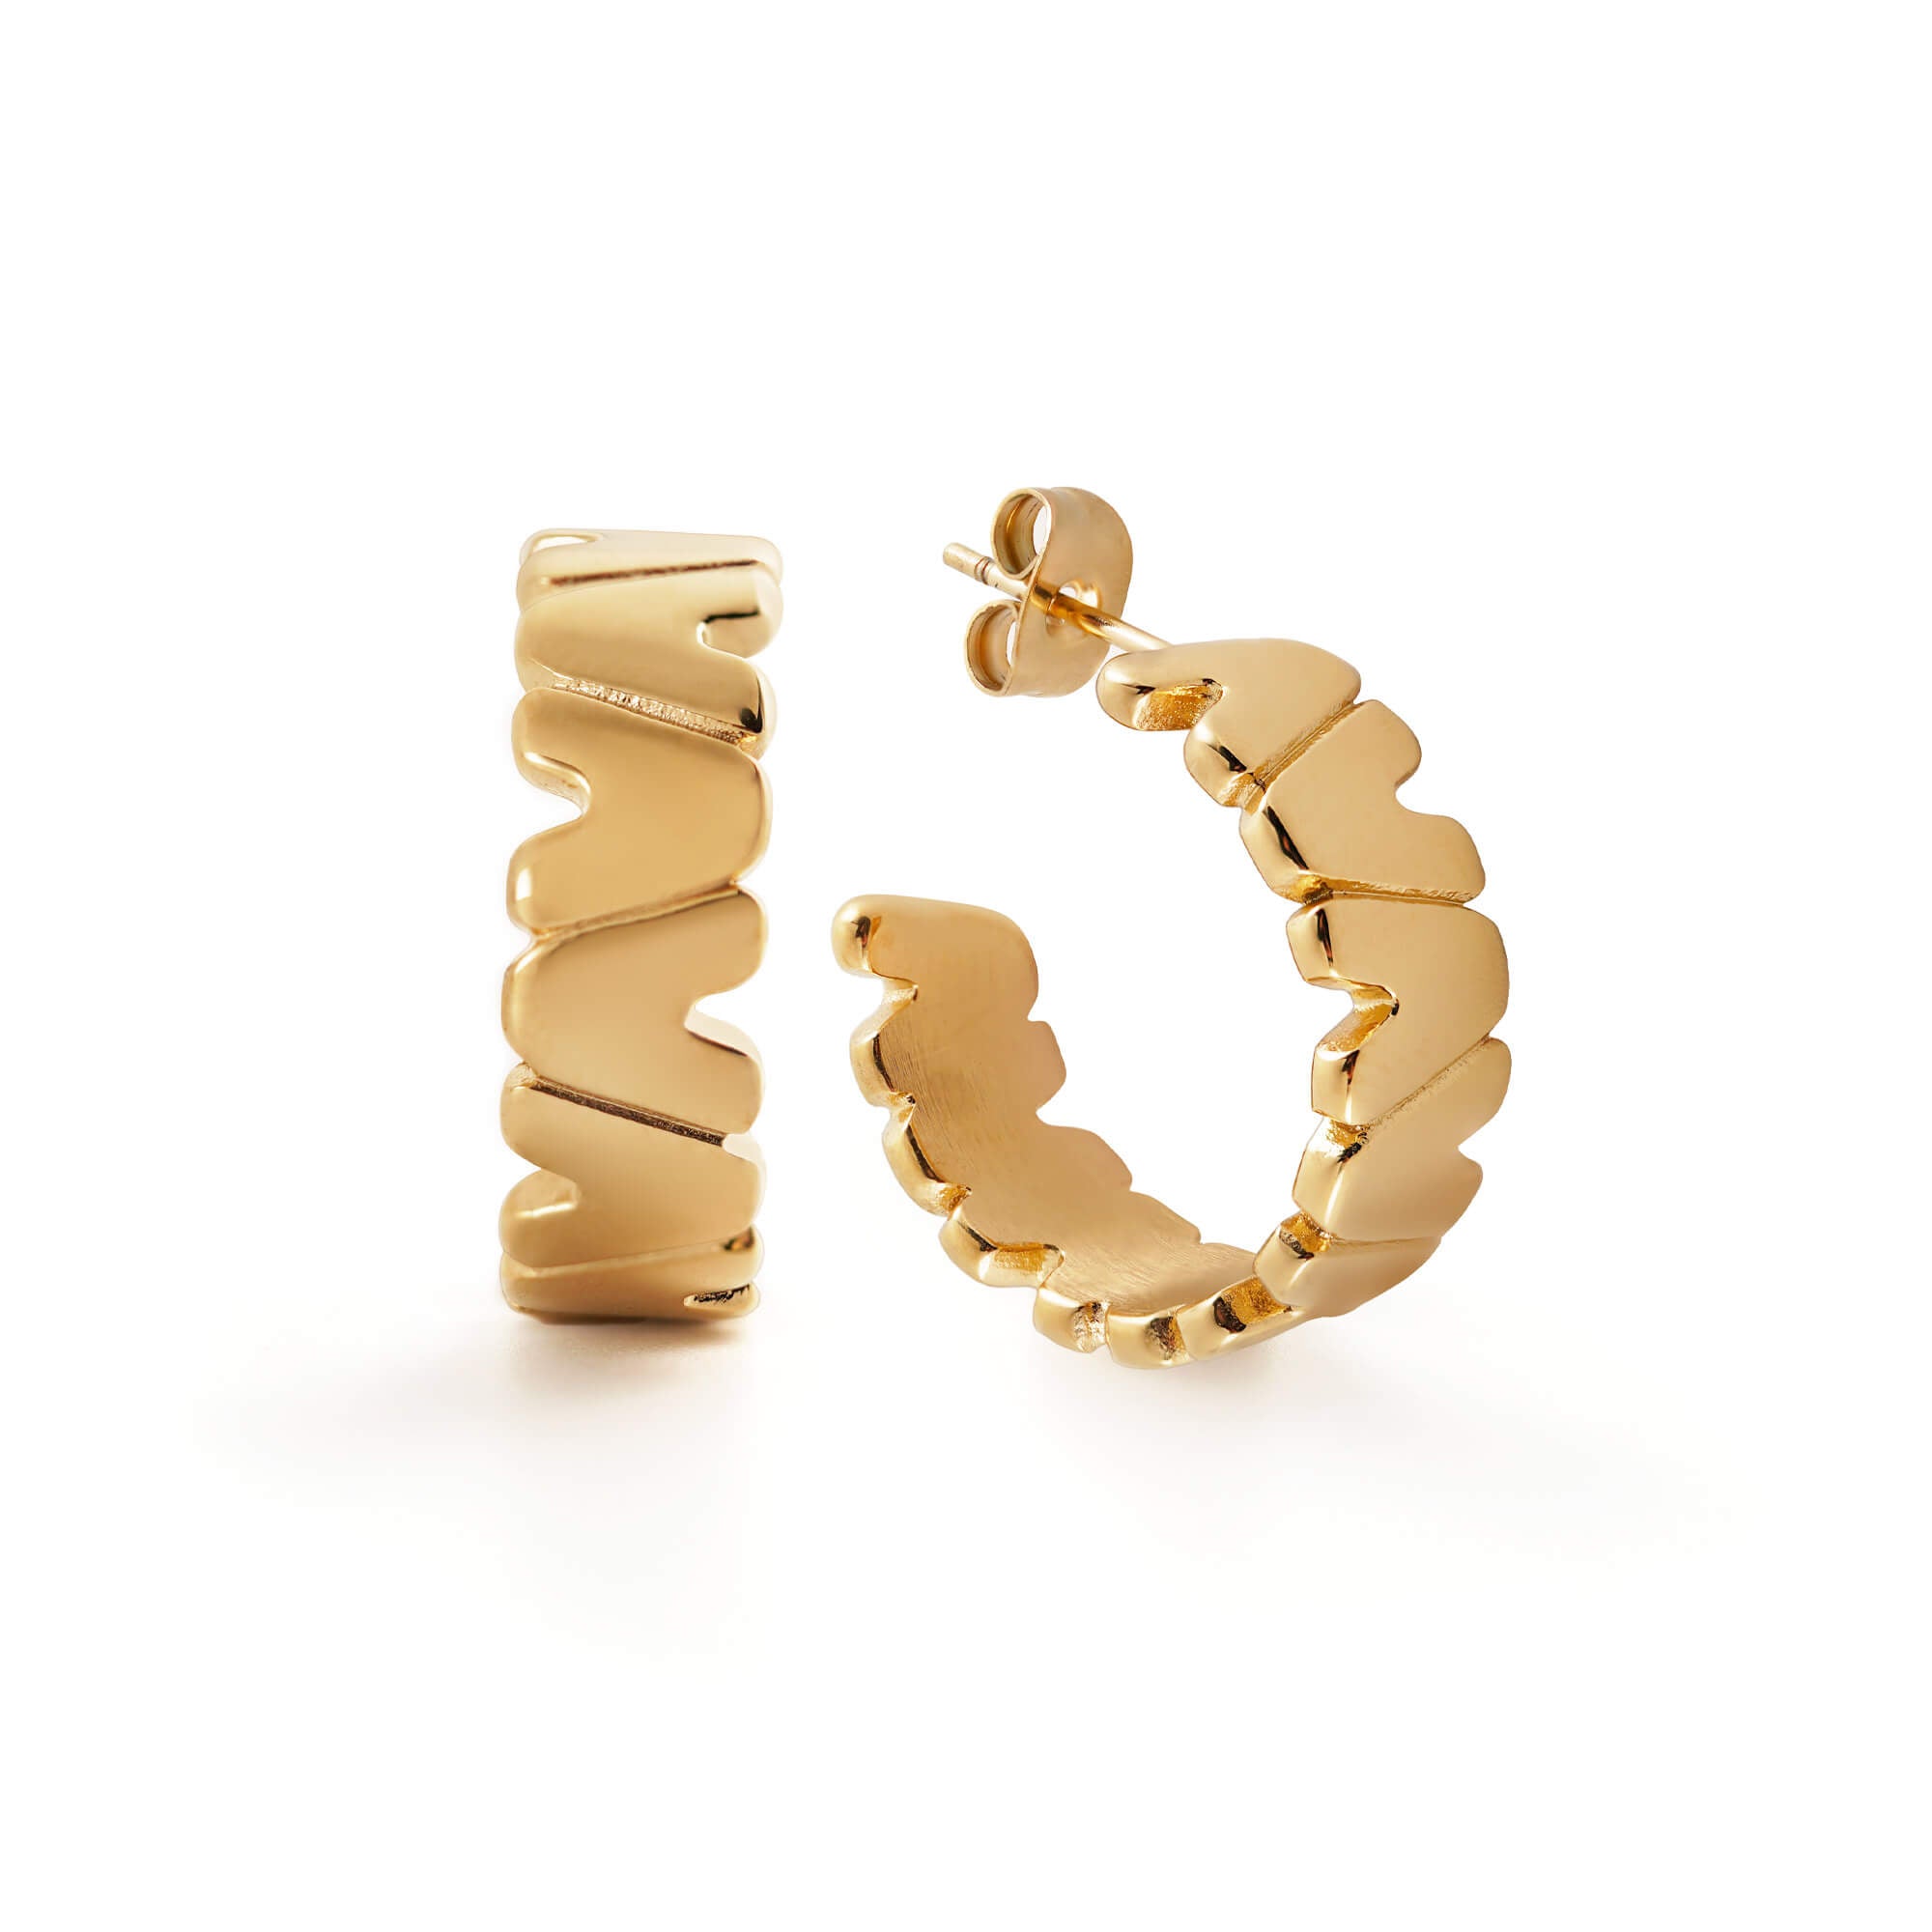 SAINQ women's earring by Five Jwlry, designed in 14k gold and uniquely shaped using the Roman numeral 'V' for five. Made from water-resistant 316L stainless steel. Hypoallergenic with a 2-year warranty.